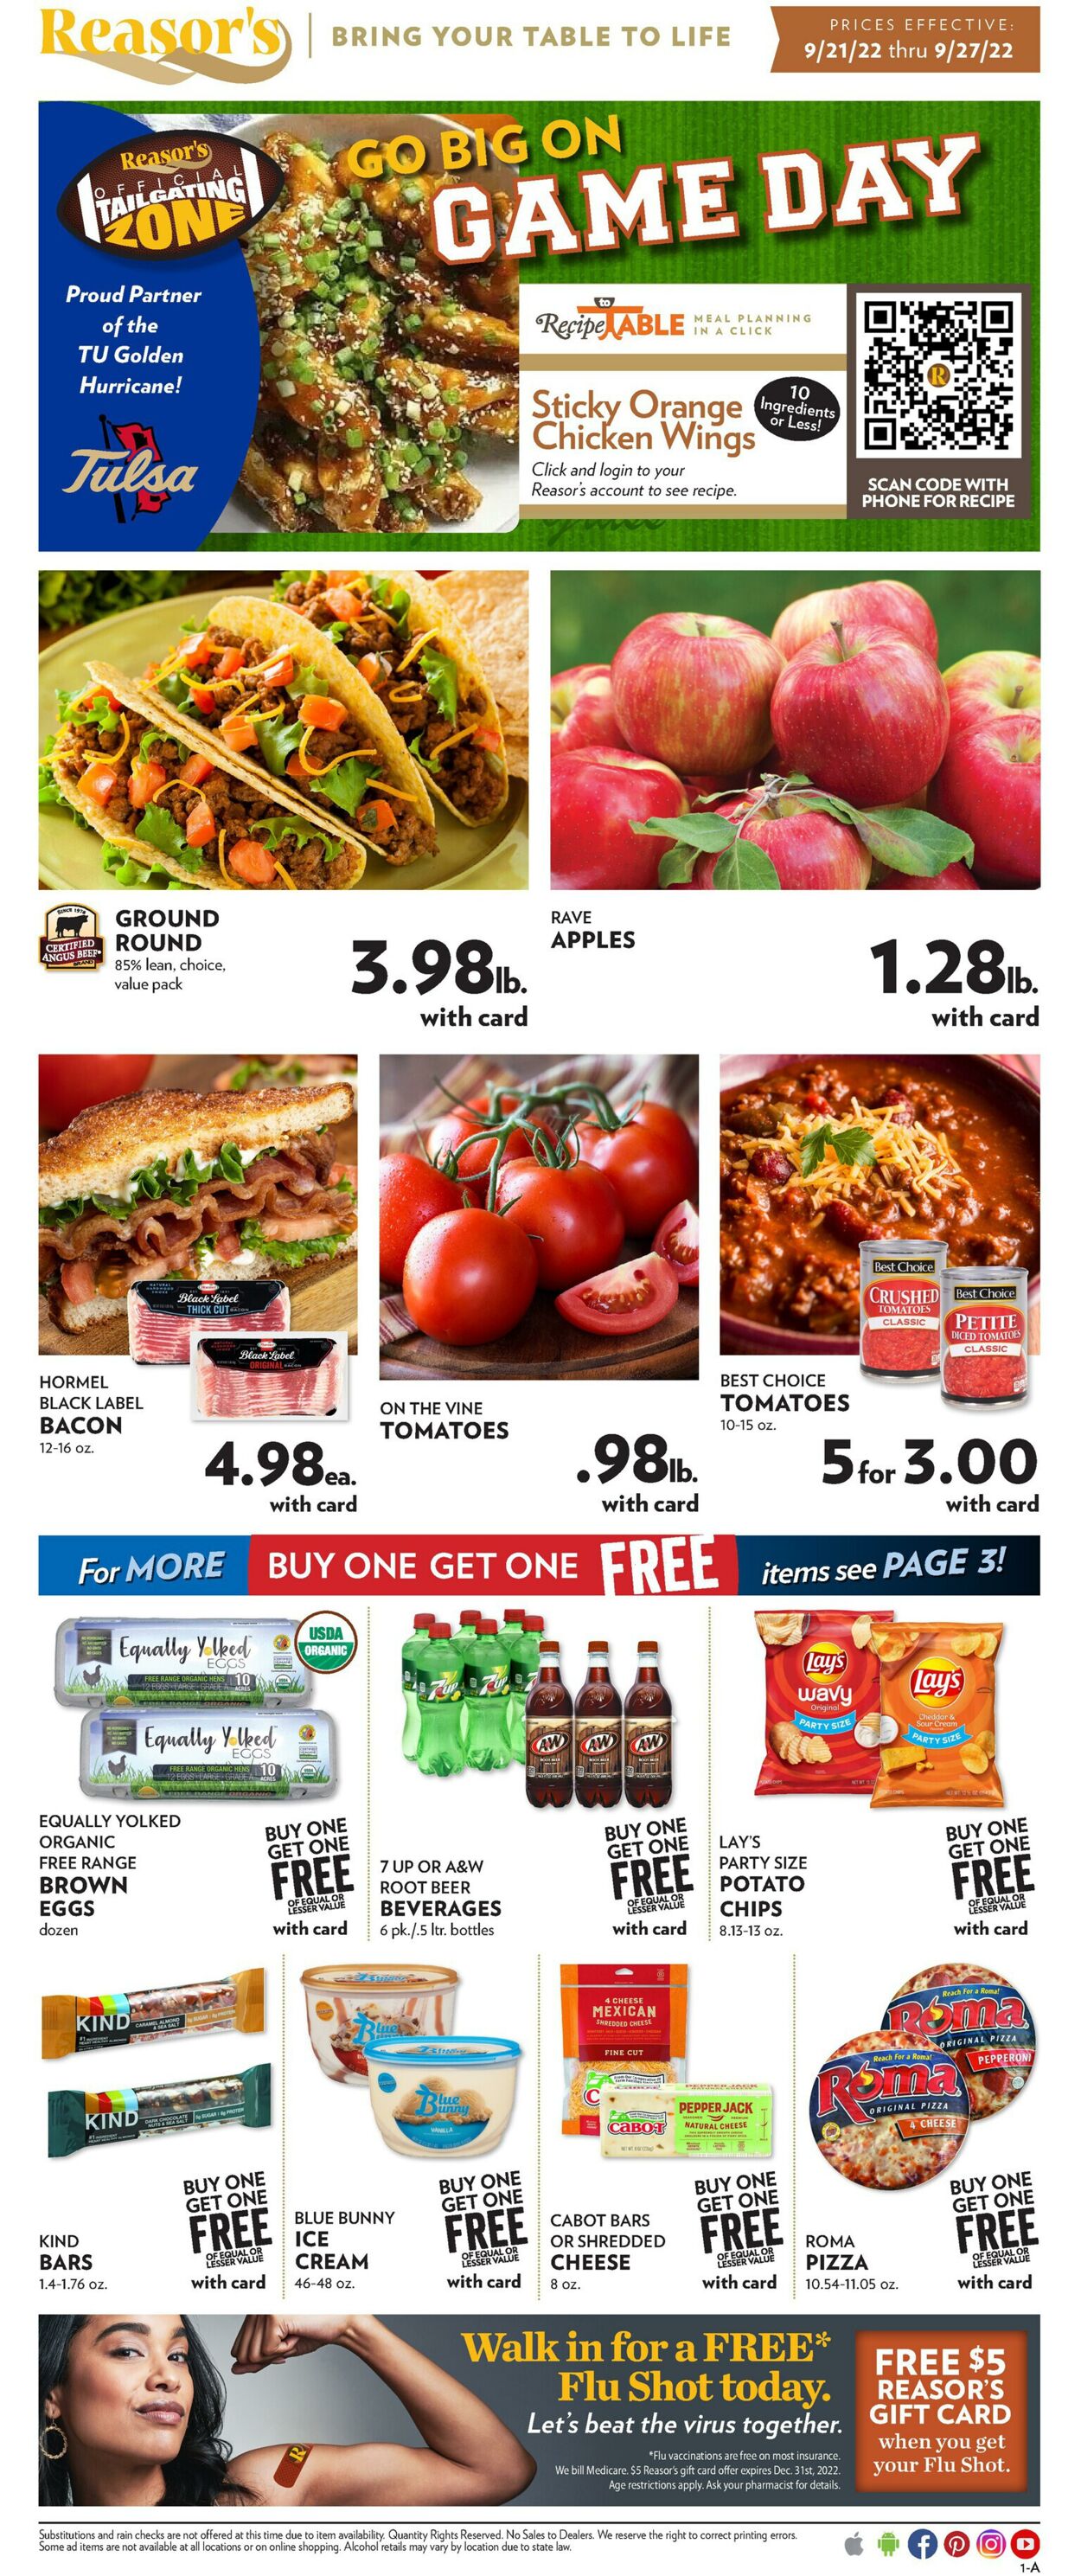 Reasor's Promotional weekly ads